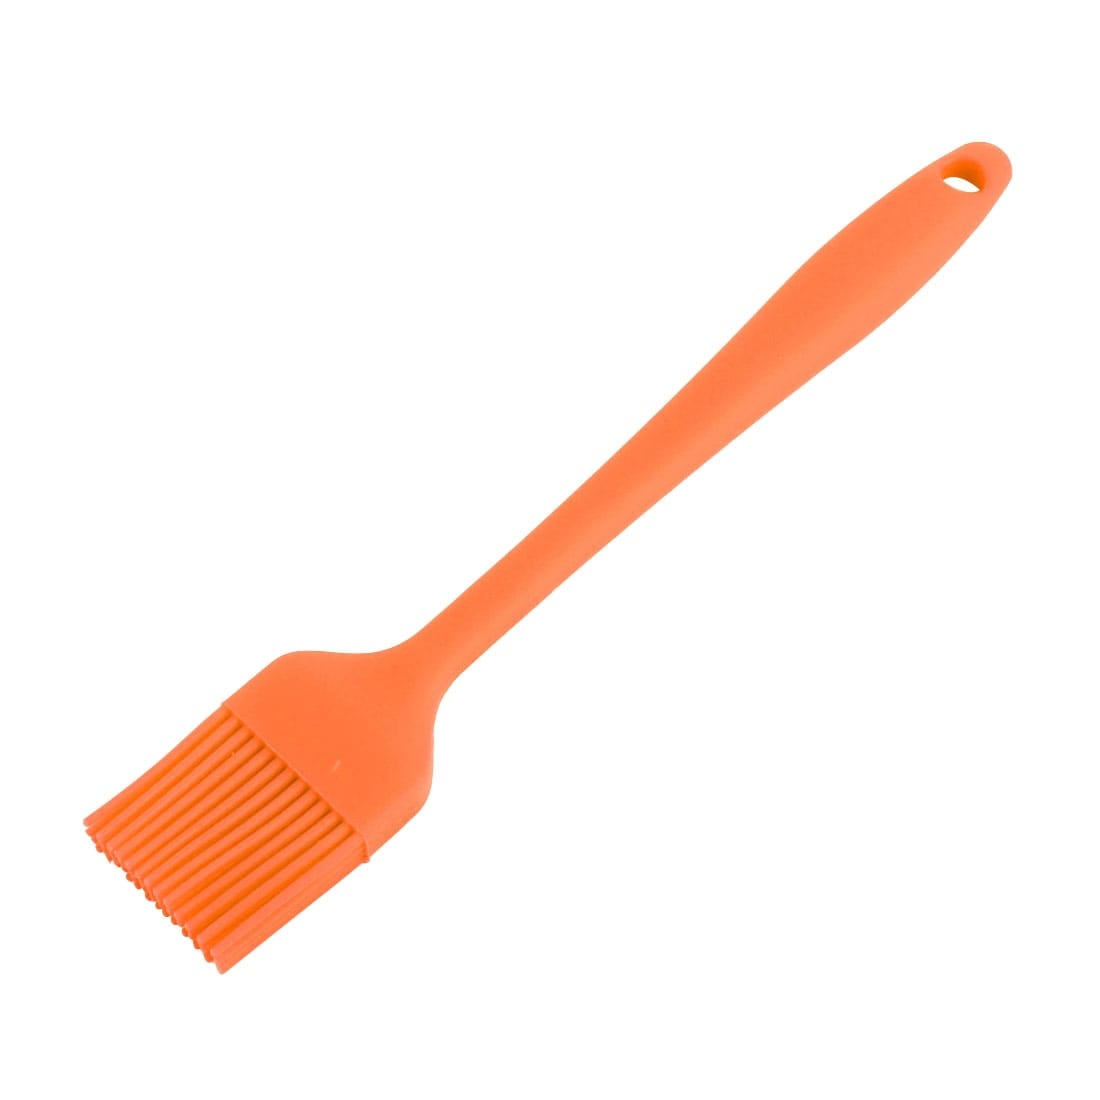 https://ak1.ostkcdn.com/images/products/is/images/direct/046c5bba5f16811ef5cfa3807cca8ff488d5501f/Kitchenware-Silicone-Cooking-Tool-Baster-Turkey-Barbecue-Pastry-Brush-Orange.jpg